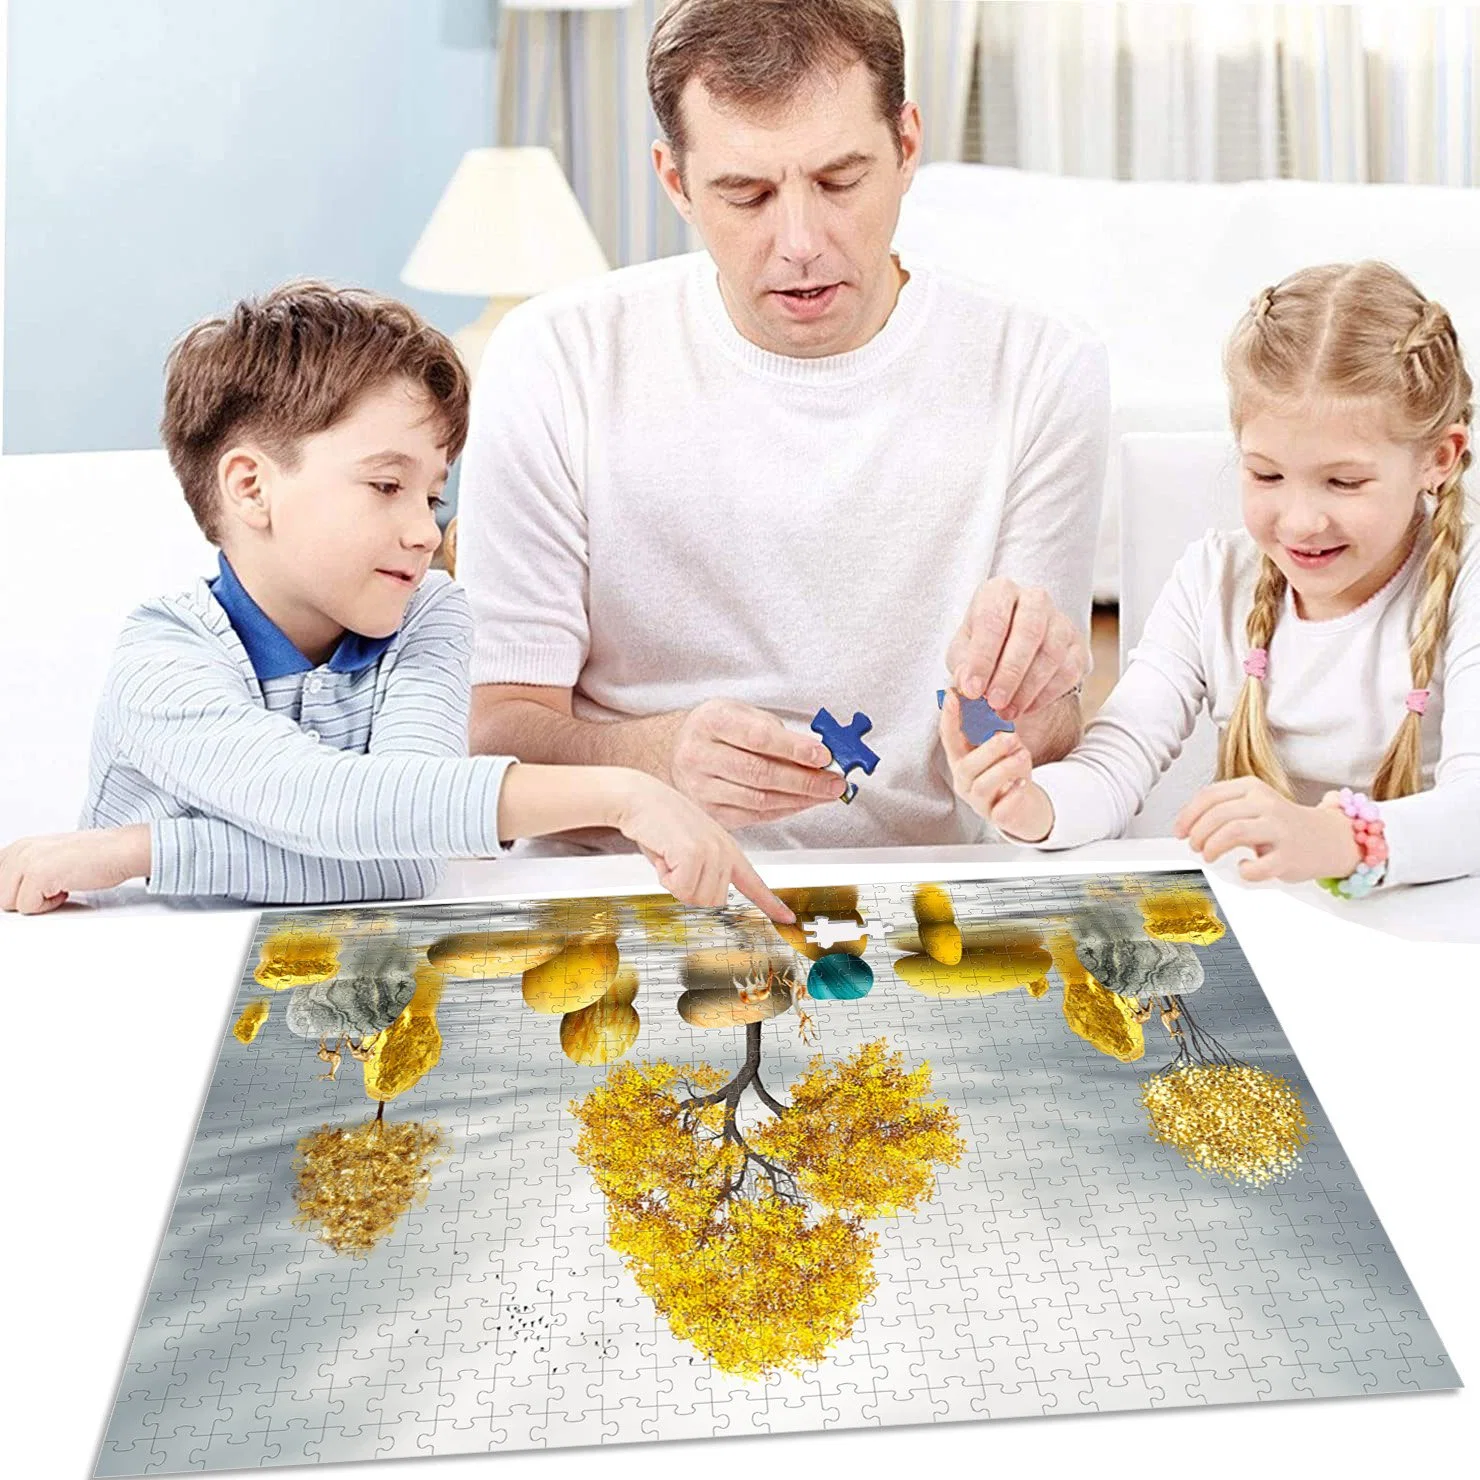 The Time Comes 1000 Piece Plastic Puzzle in Bulk with Customisable Patterns, Sizes and Number of Pieces for Toy Gifts for Adults and Children.